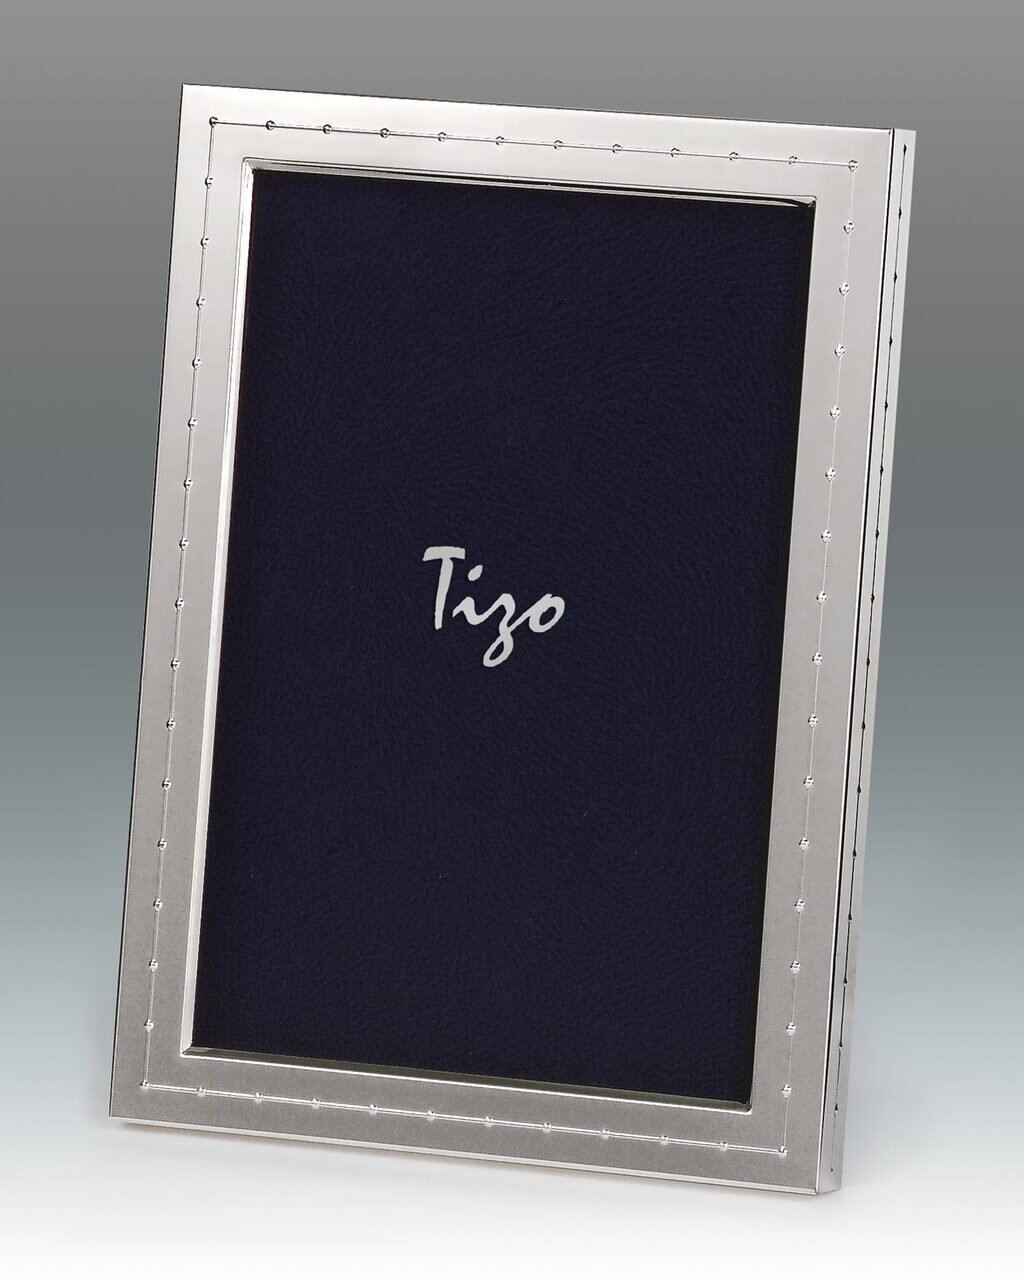 Tizo Ropes 4 x 6 Inch Silver Plated Picture Frame